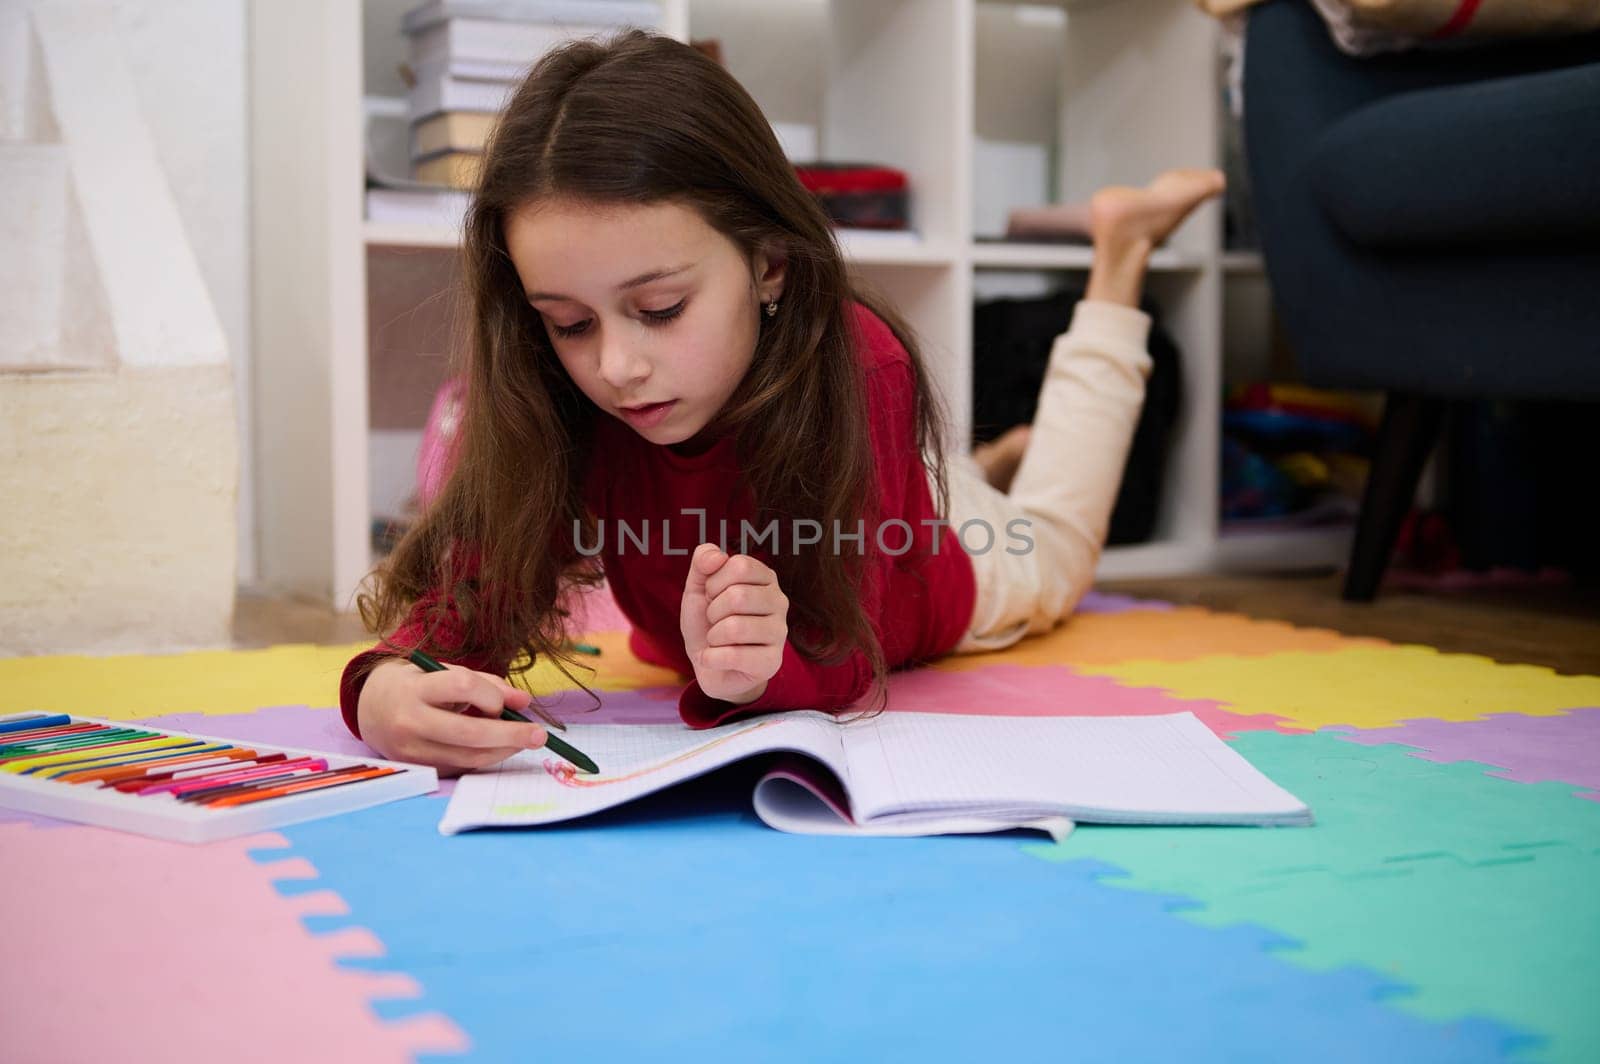 Authentic portrait of Caucasian elementary age school child girl doing homework, drawing picture with colorful, pastel pencils, writing and reading at home by artgf